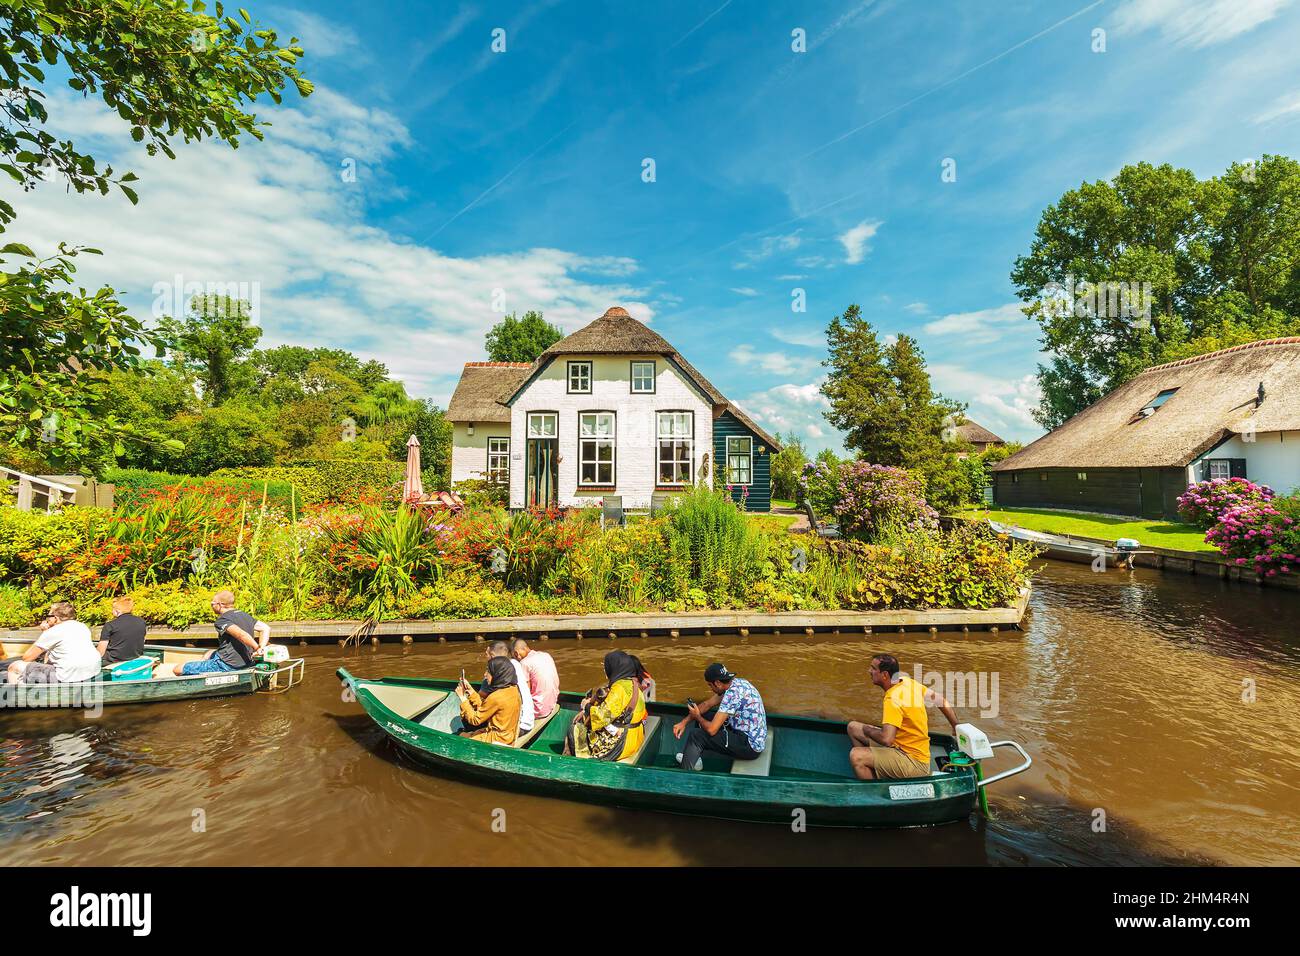 GIETHOORN, THE NETHERLANDS - JULY 26, 2016: Tourists enjoying a canal cruise with small boats in the famous Dutch village of Giethoorn Stock Photo